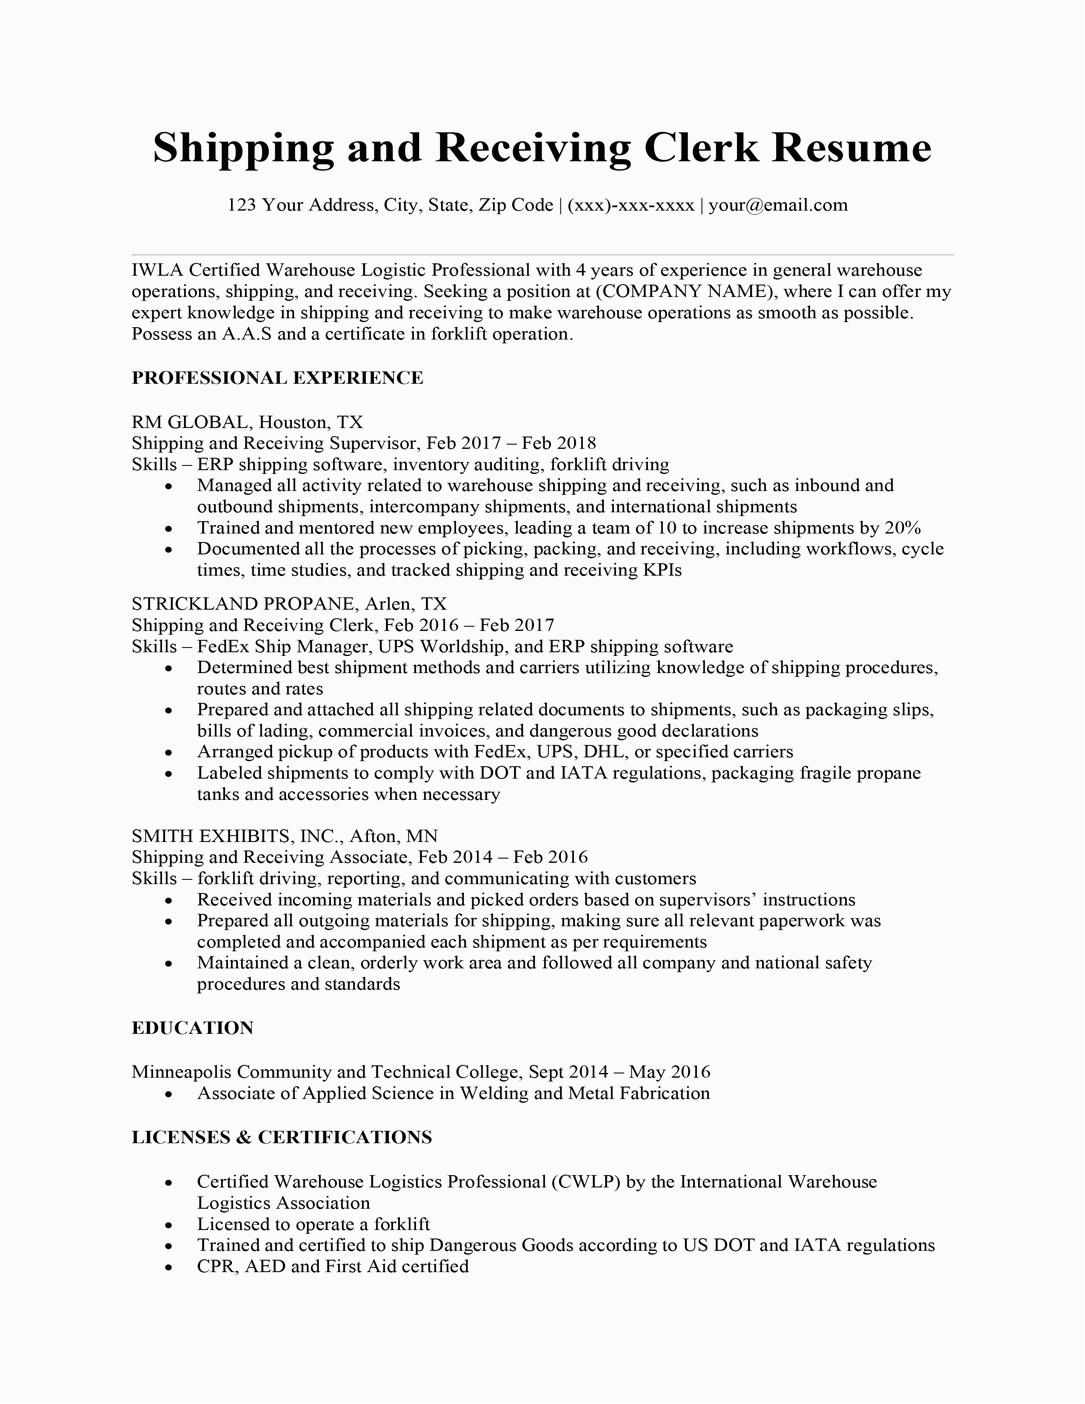 Sample Resume for Shipping and Receiving Worker Shipping and Receiving Clerk Resume Sample & Writing Tips